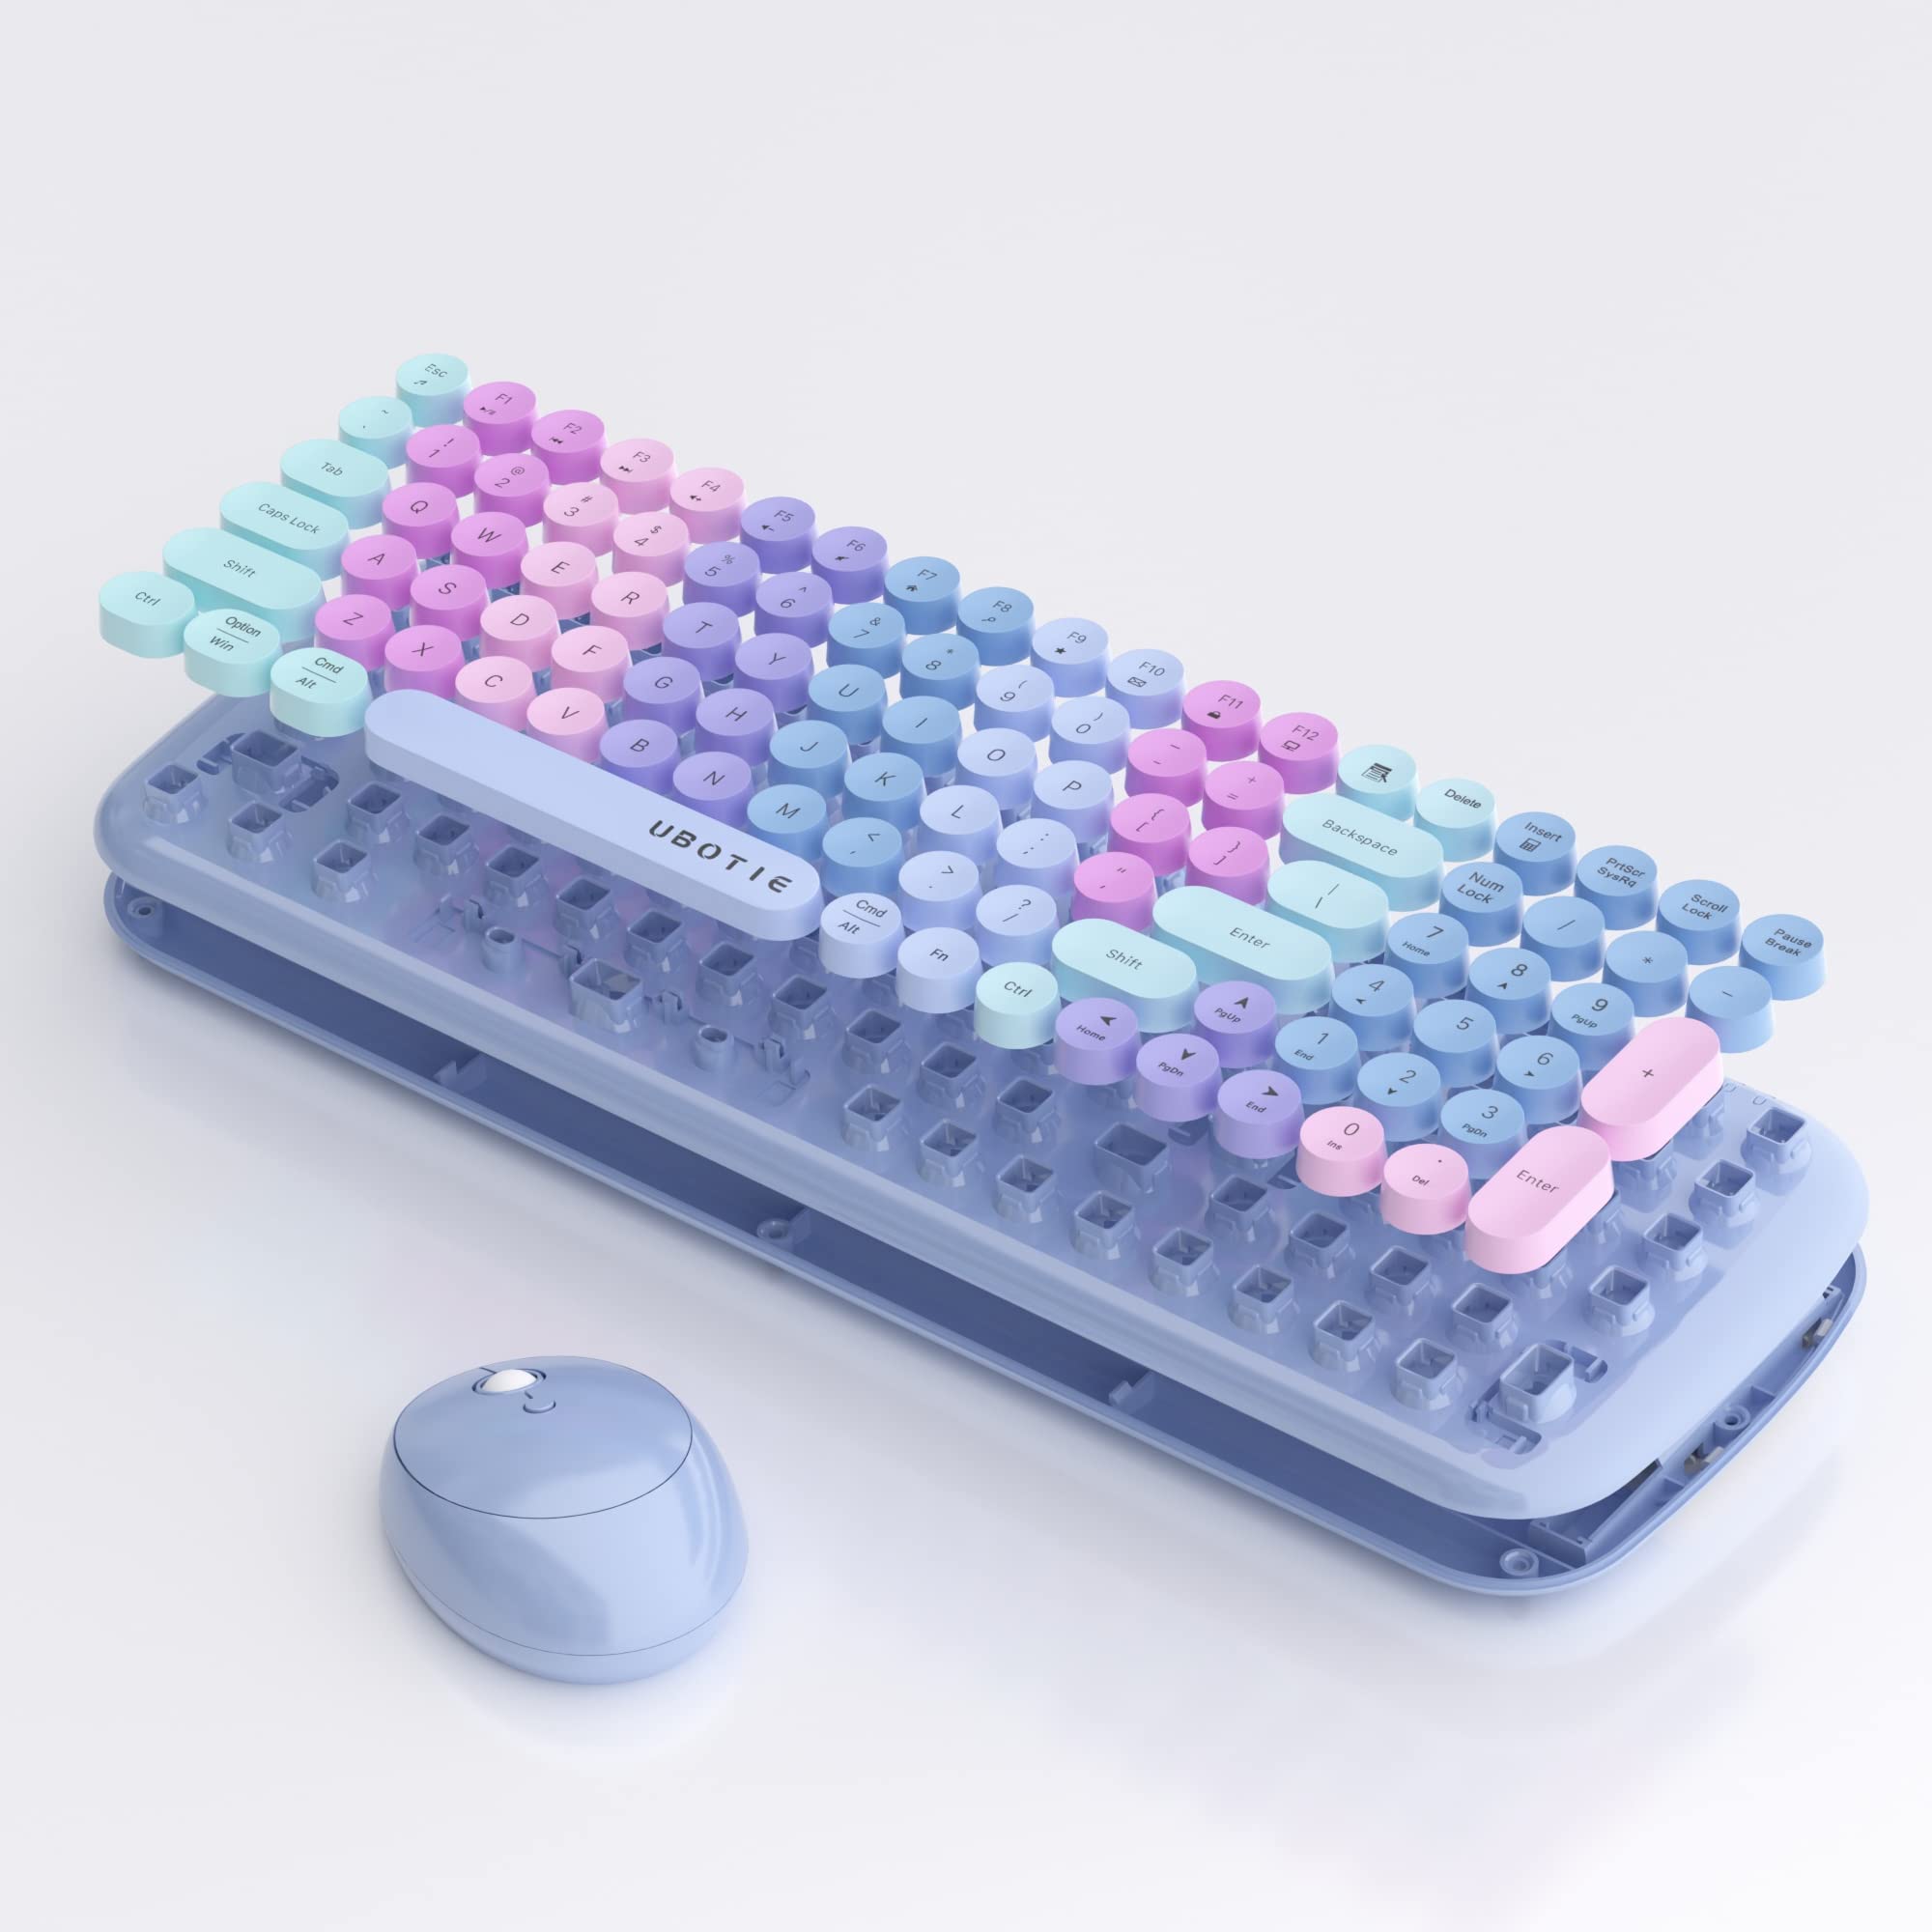 Wireless Keyboards and Mouse Combos, UBOTIE Colorful Gradient Rainbow Colored Retro Typewriter Flexible Keyboard, 2.4GHz Connection and Optical Mouse